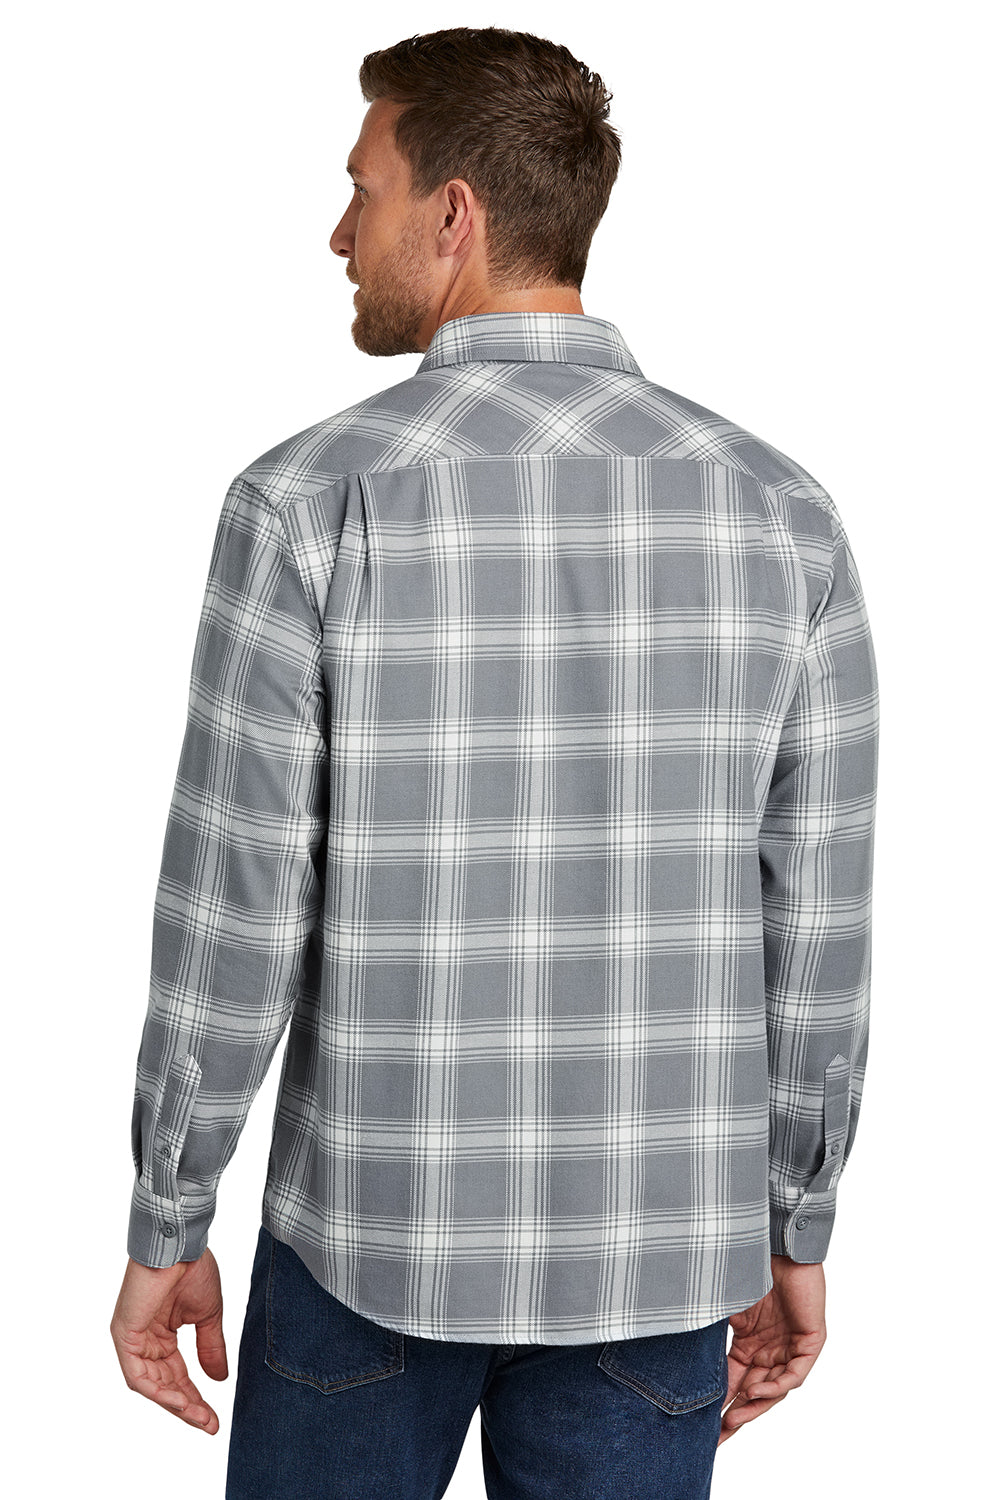 Port Authority W668 Mens Flannel Long Sleeve Button Down Shirt w/ Double Pockets Grey/Cream Plaid Back